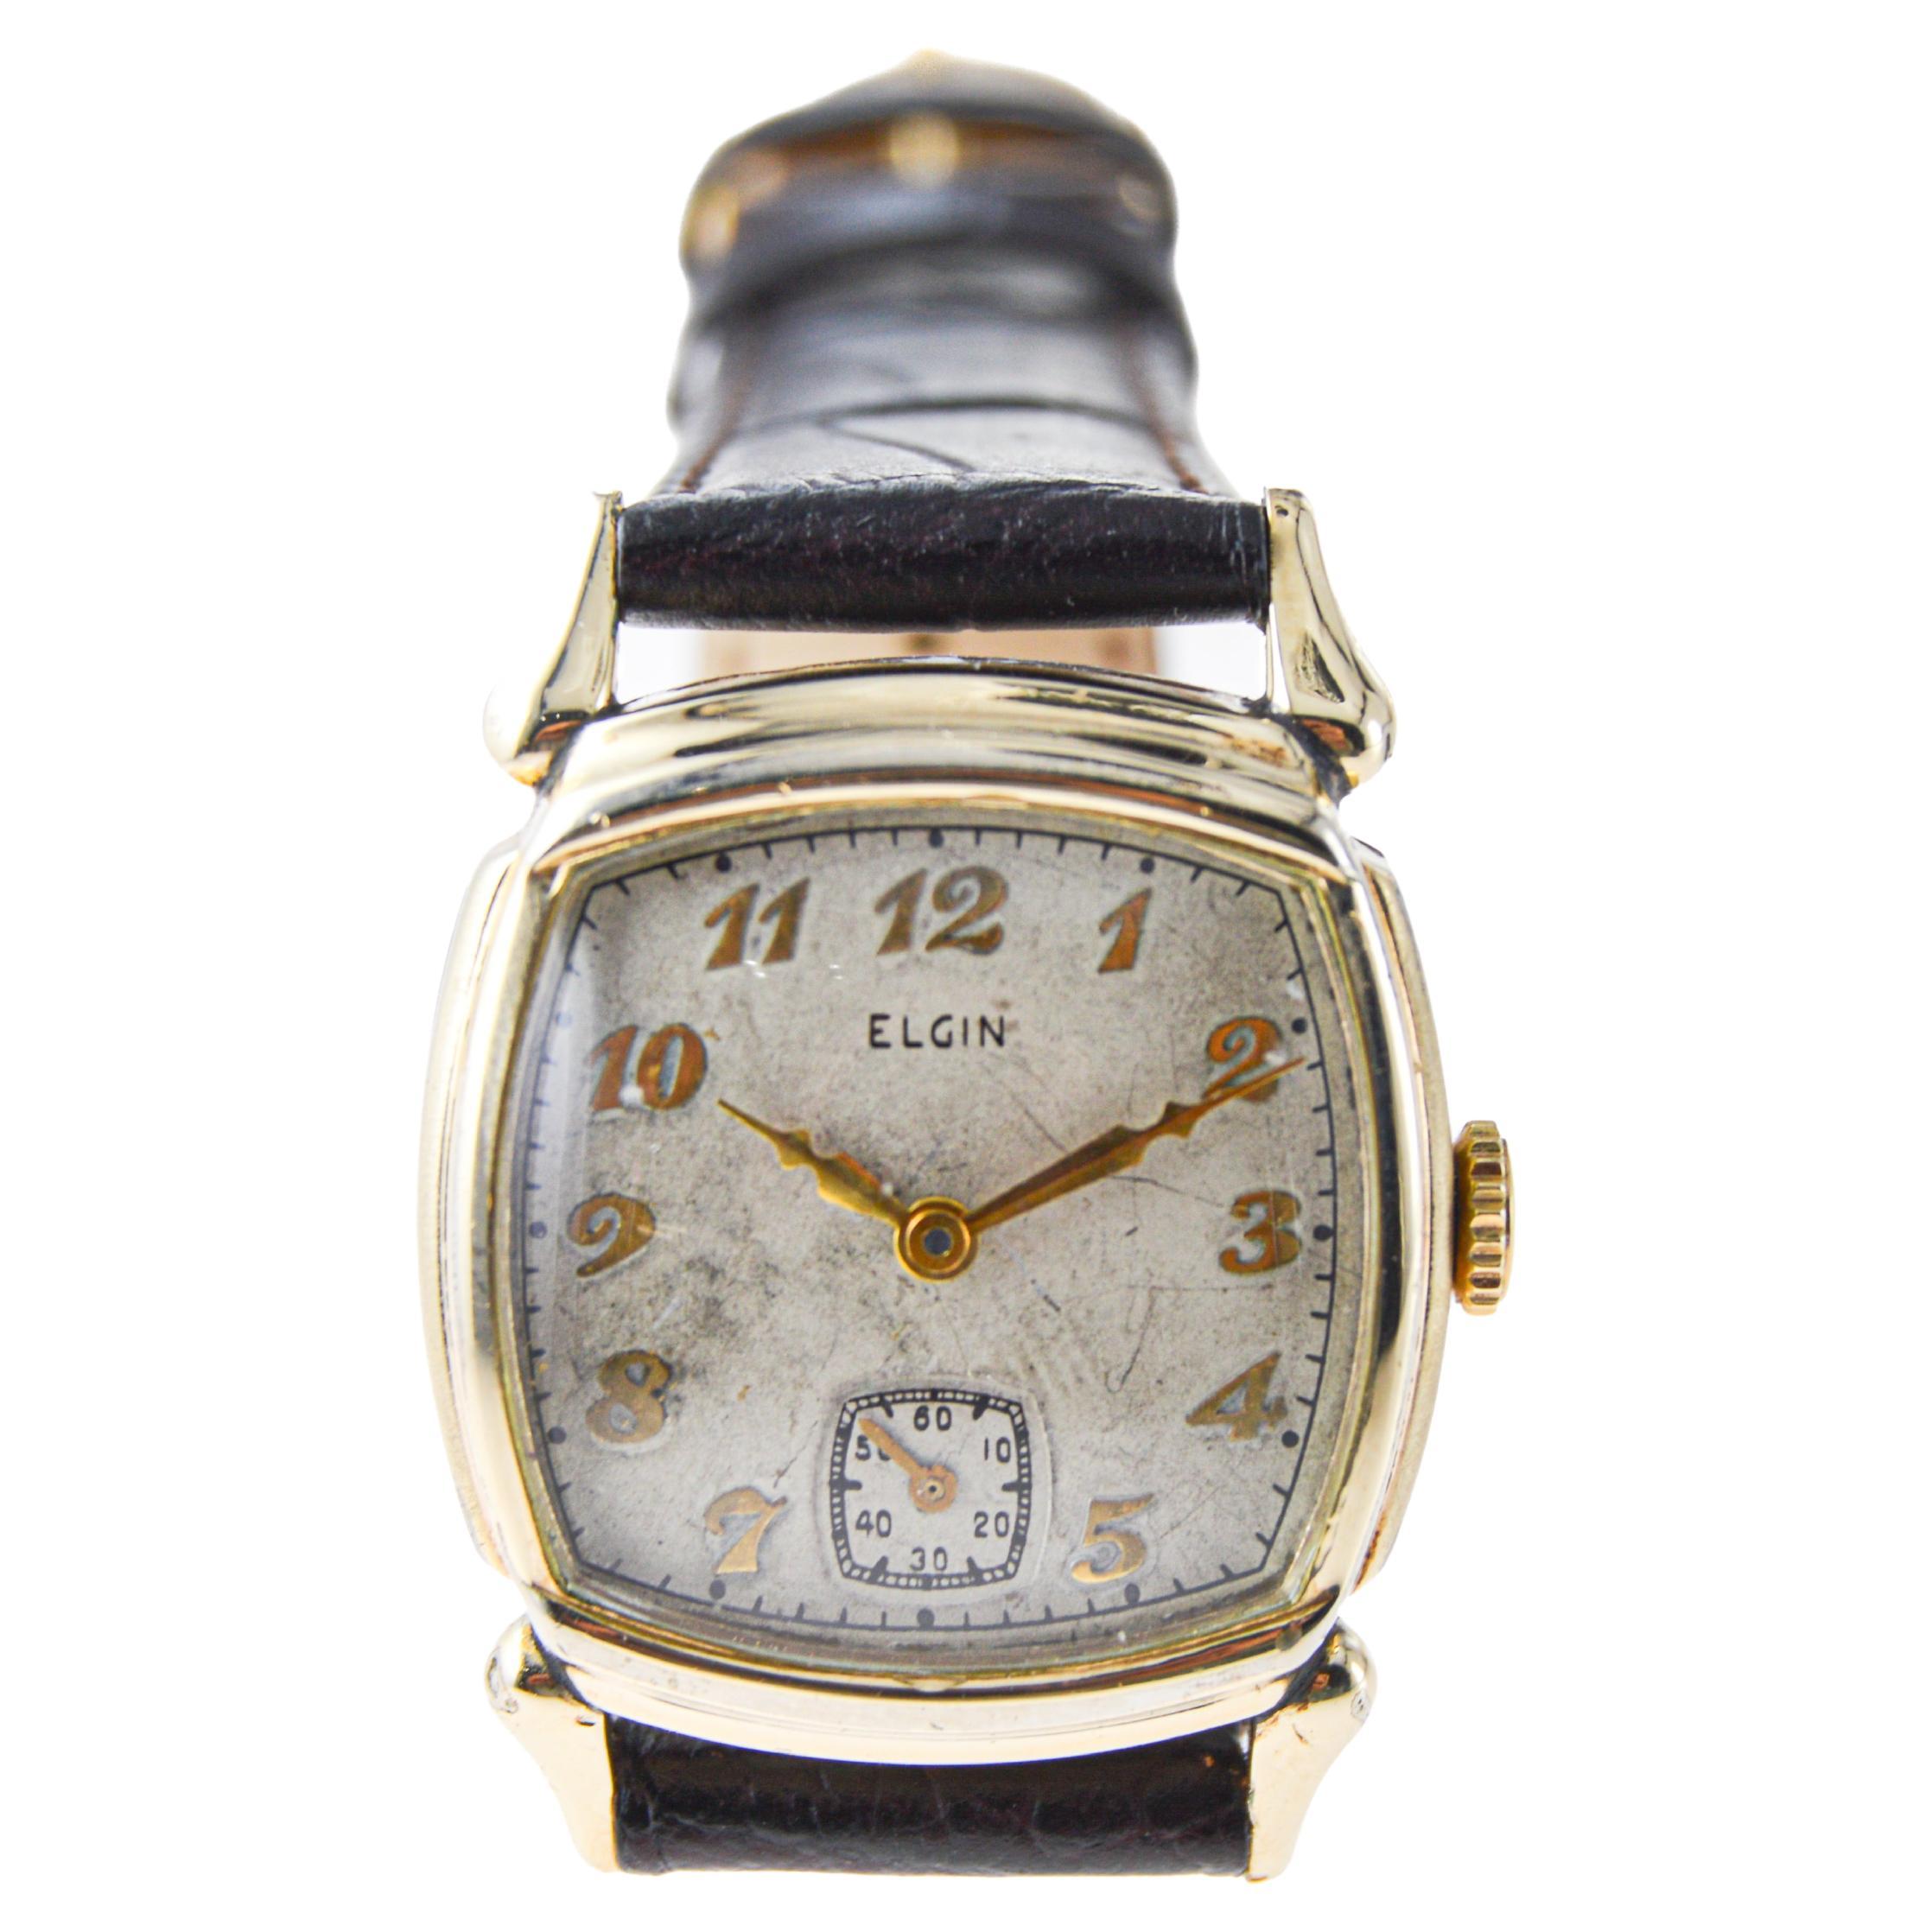 Elgin Gold Filled Art Deco Cushion Shaped American Watch with Original Dial 1940 For Sale 4